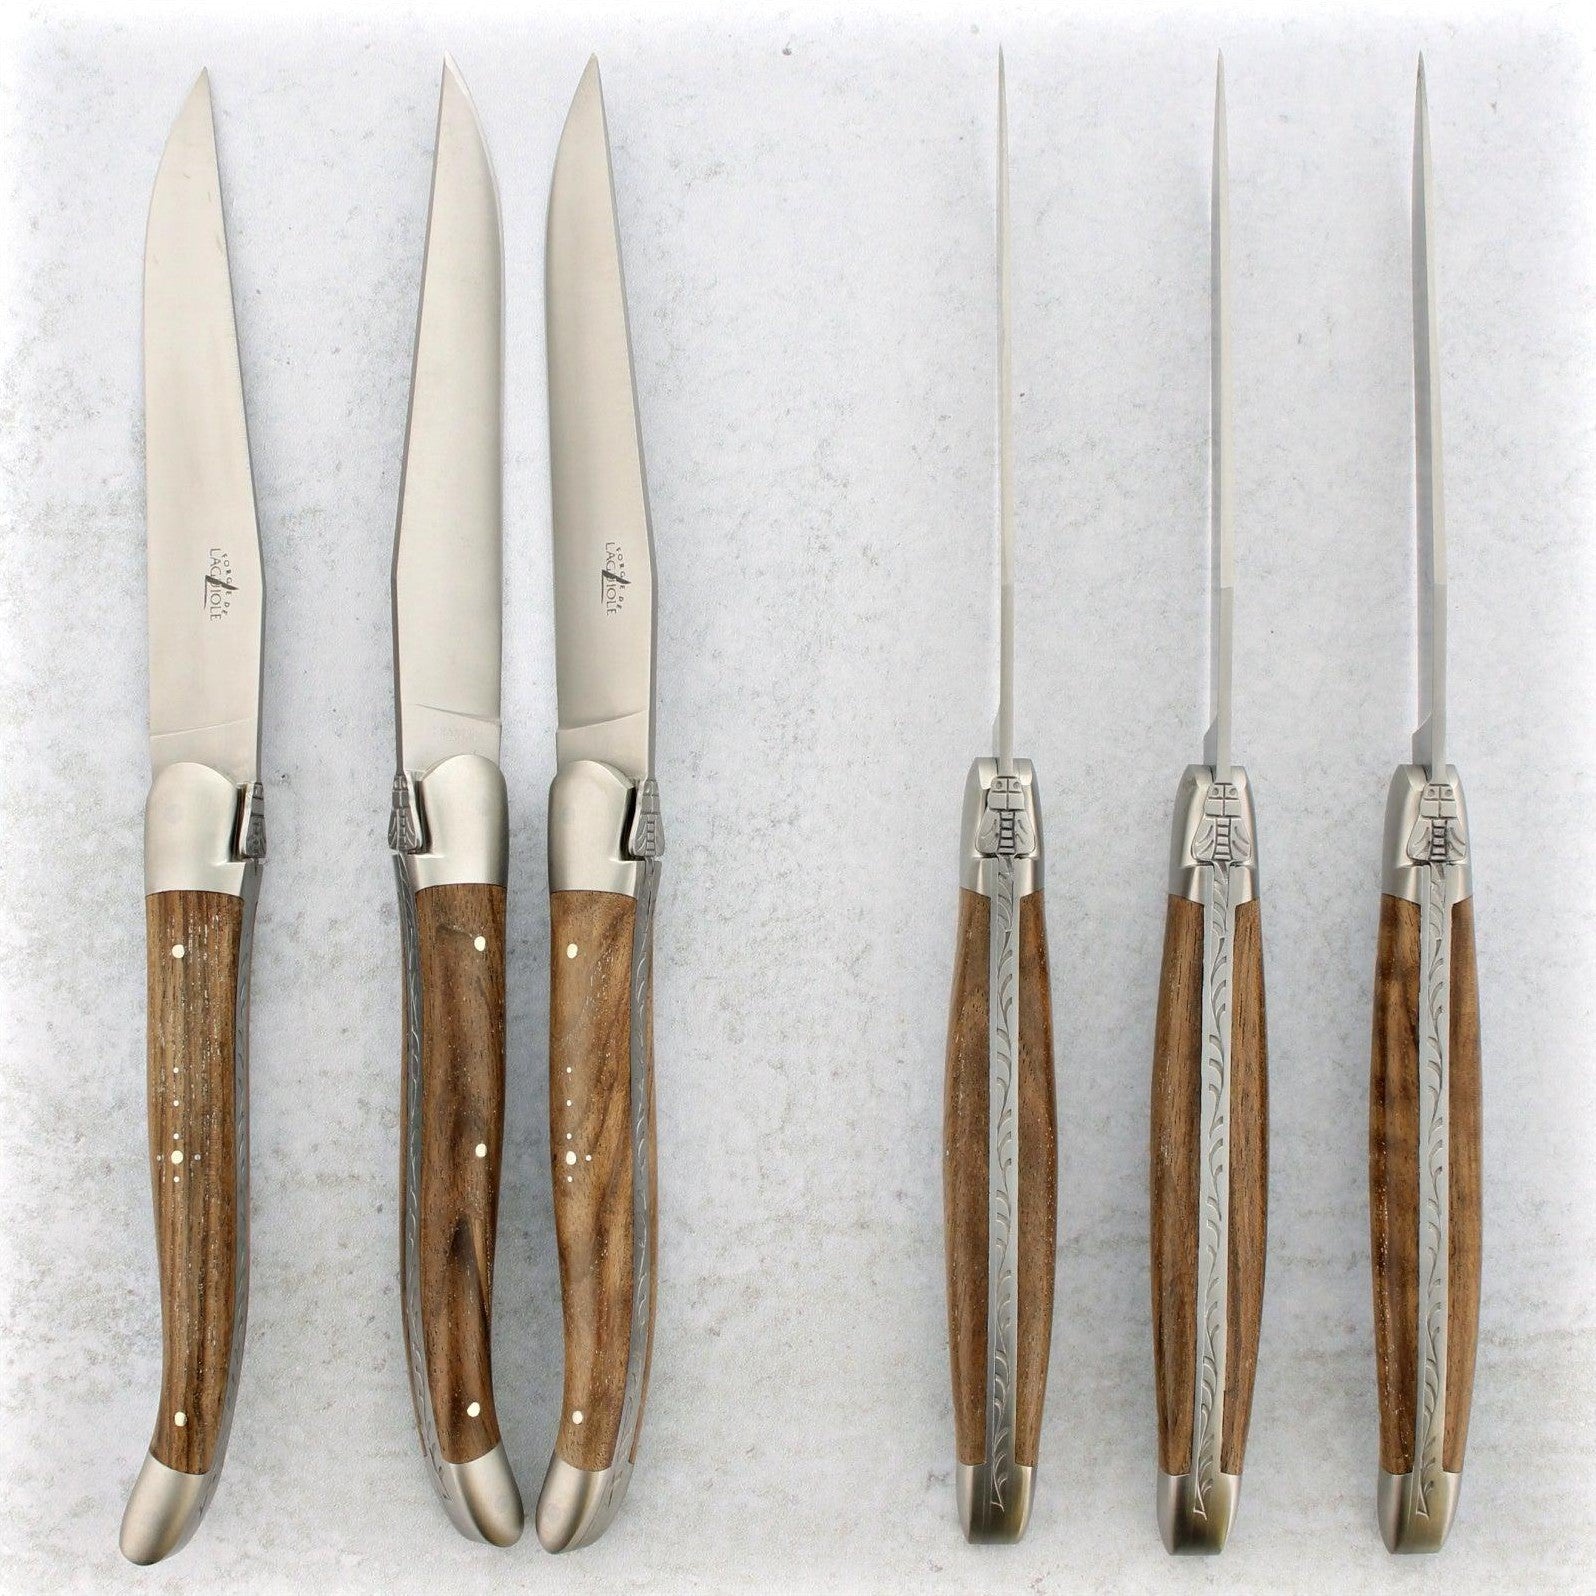 Woods Used for Knife Handles